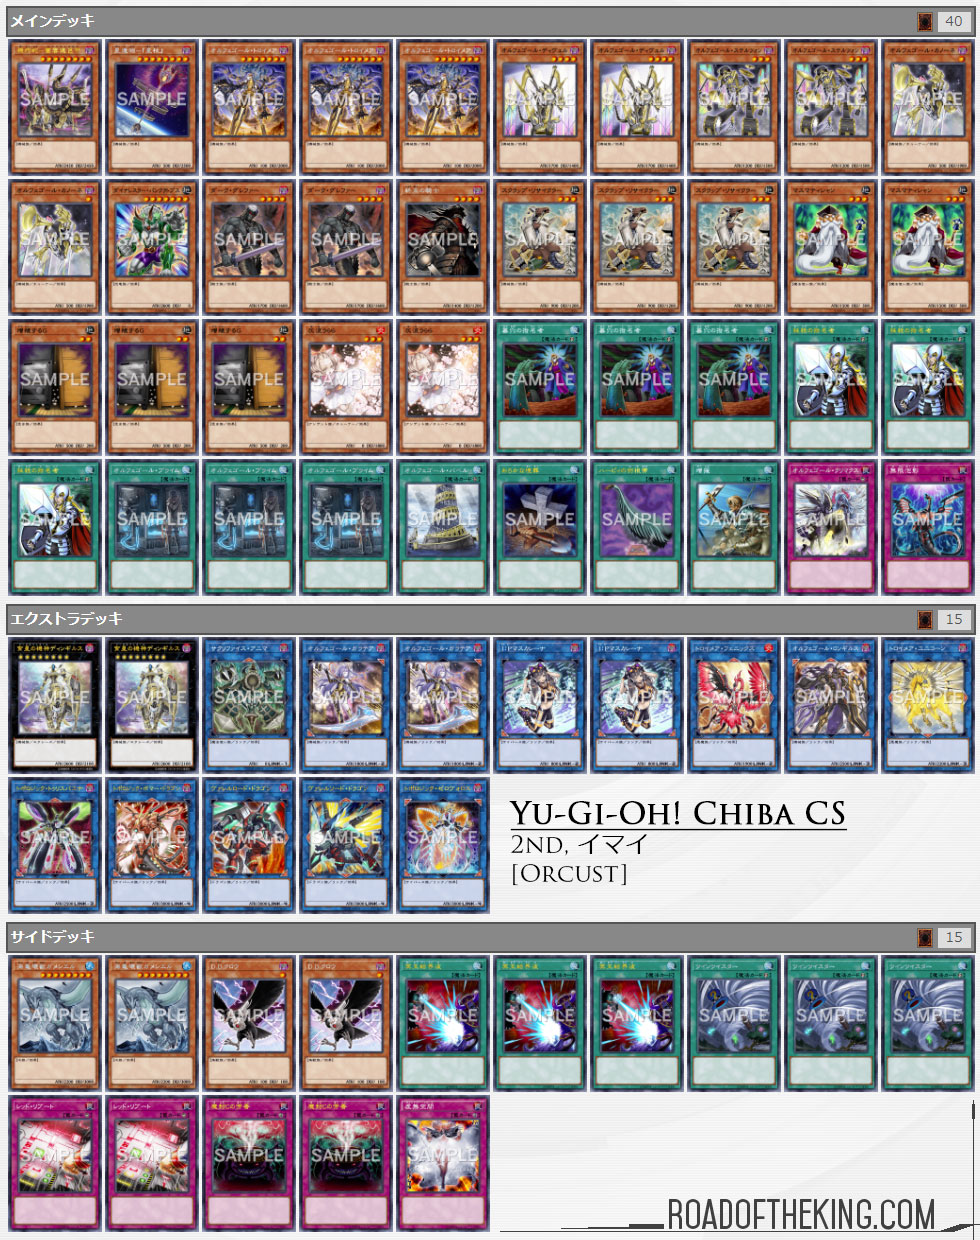 OCG 2020.01 Metagame Report #0 | Road of the King